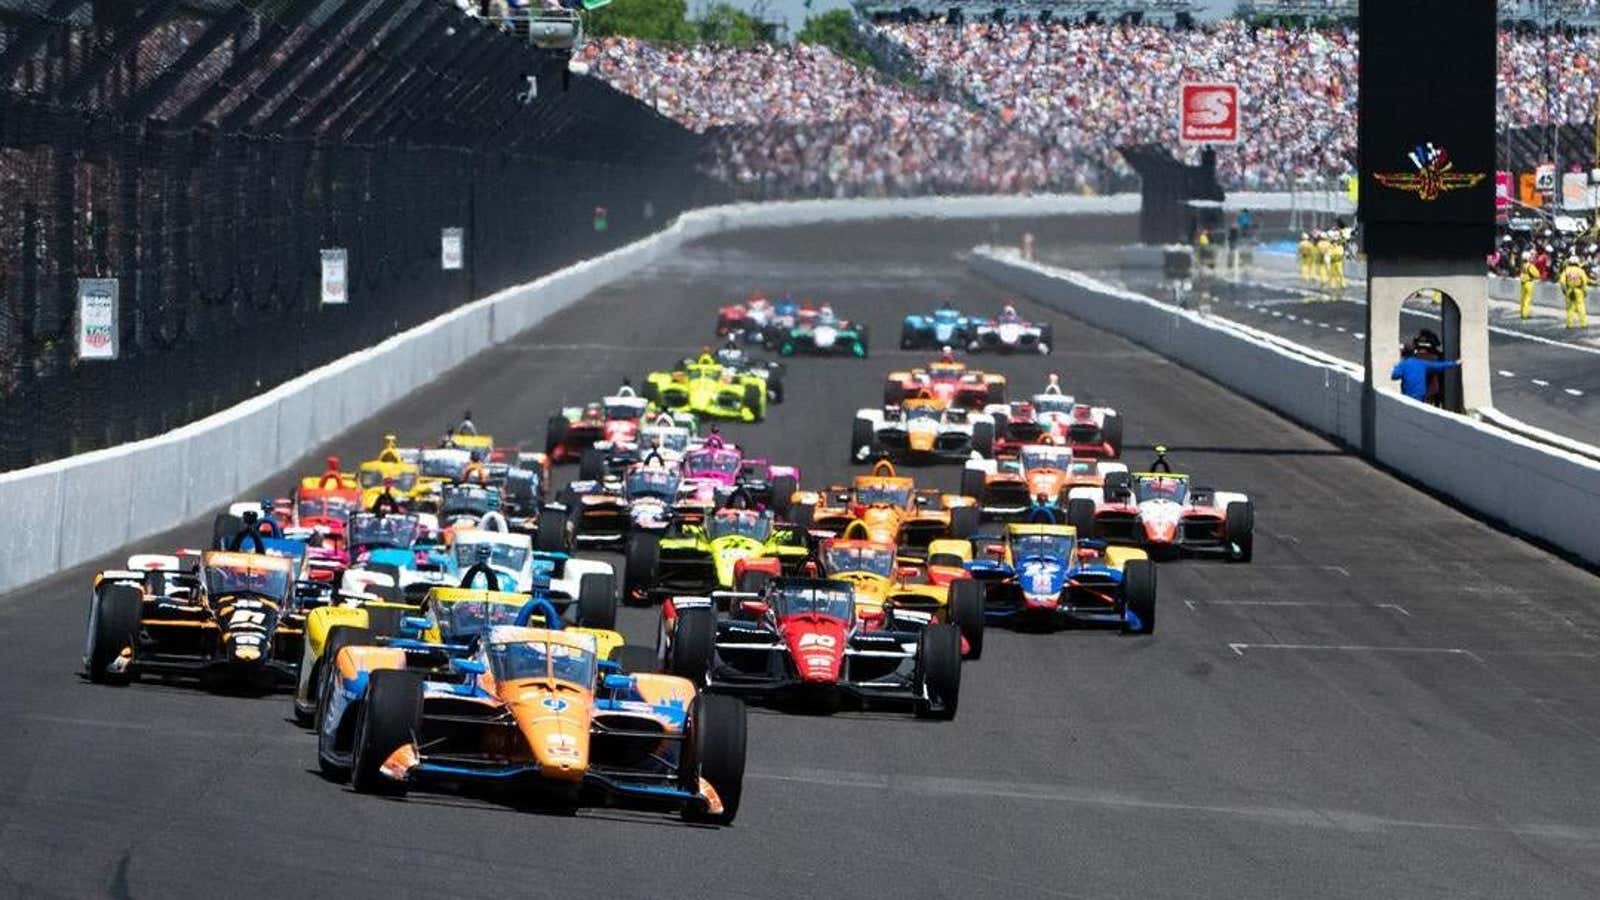 The start of the 2021 Indianapolis 500.